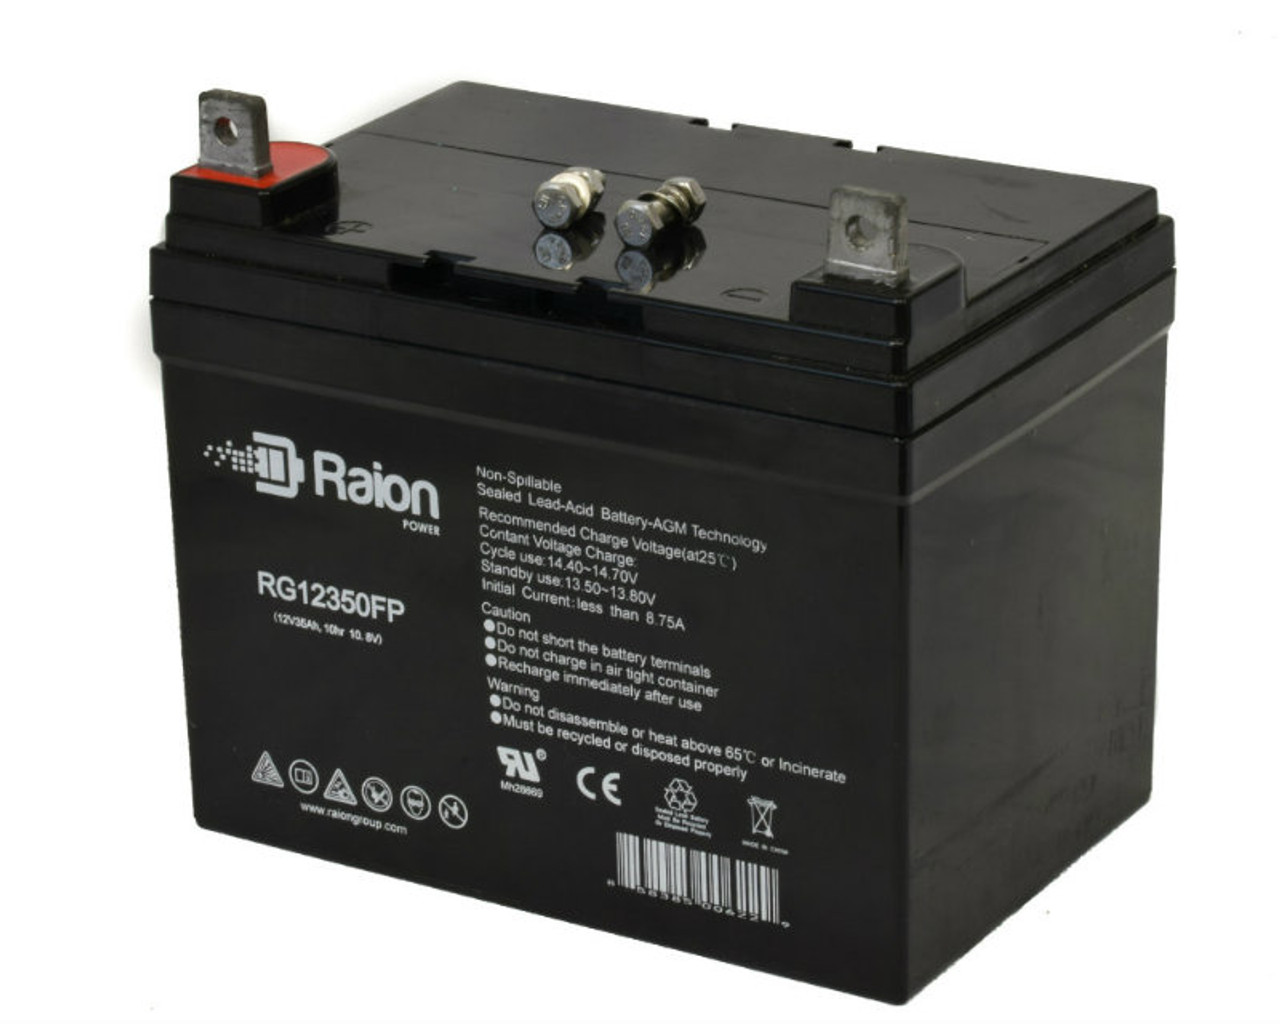 Raion Power Replacement 12V 35Ah RG12350FP Battery for Agco Allis 1720H